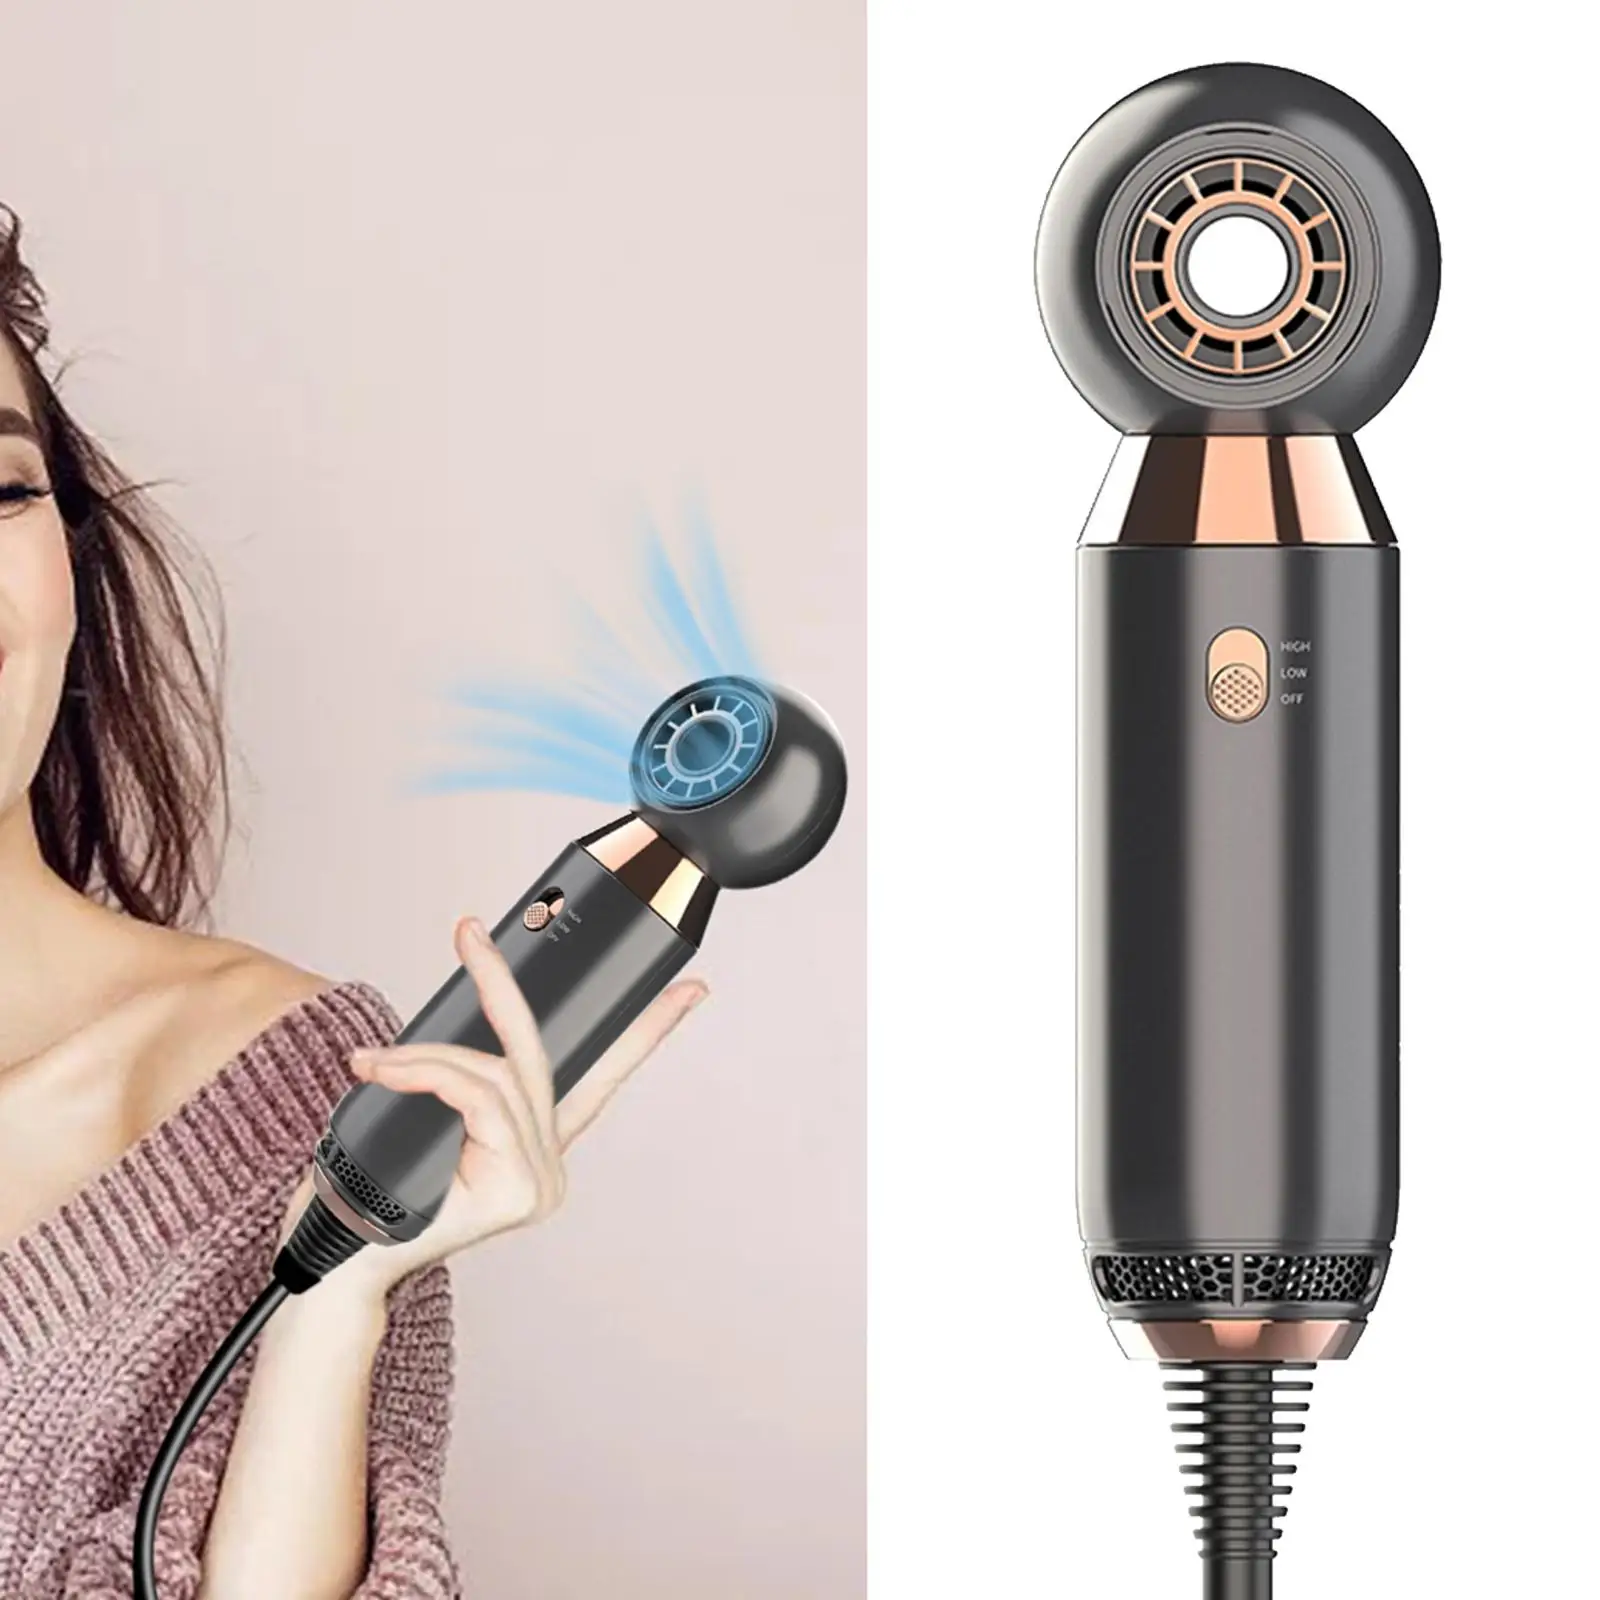 Electric Hair Dryer 800W Hot Cold Quick Dry Hot/Cold Air Hairdryer Blow Dryer for Hair Care Personal Care Dormitory Salon Hotel